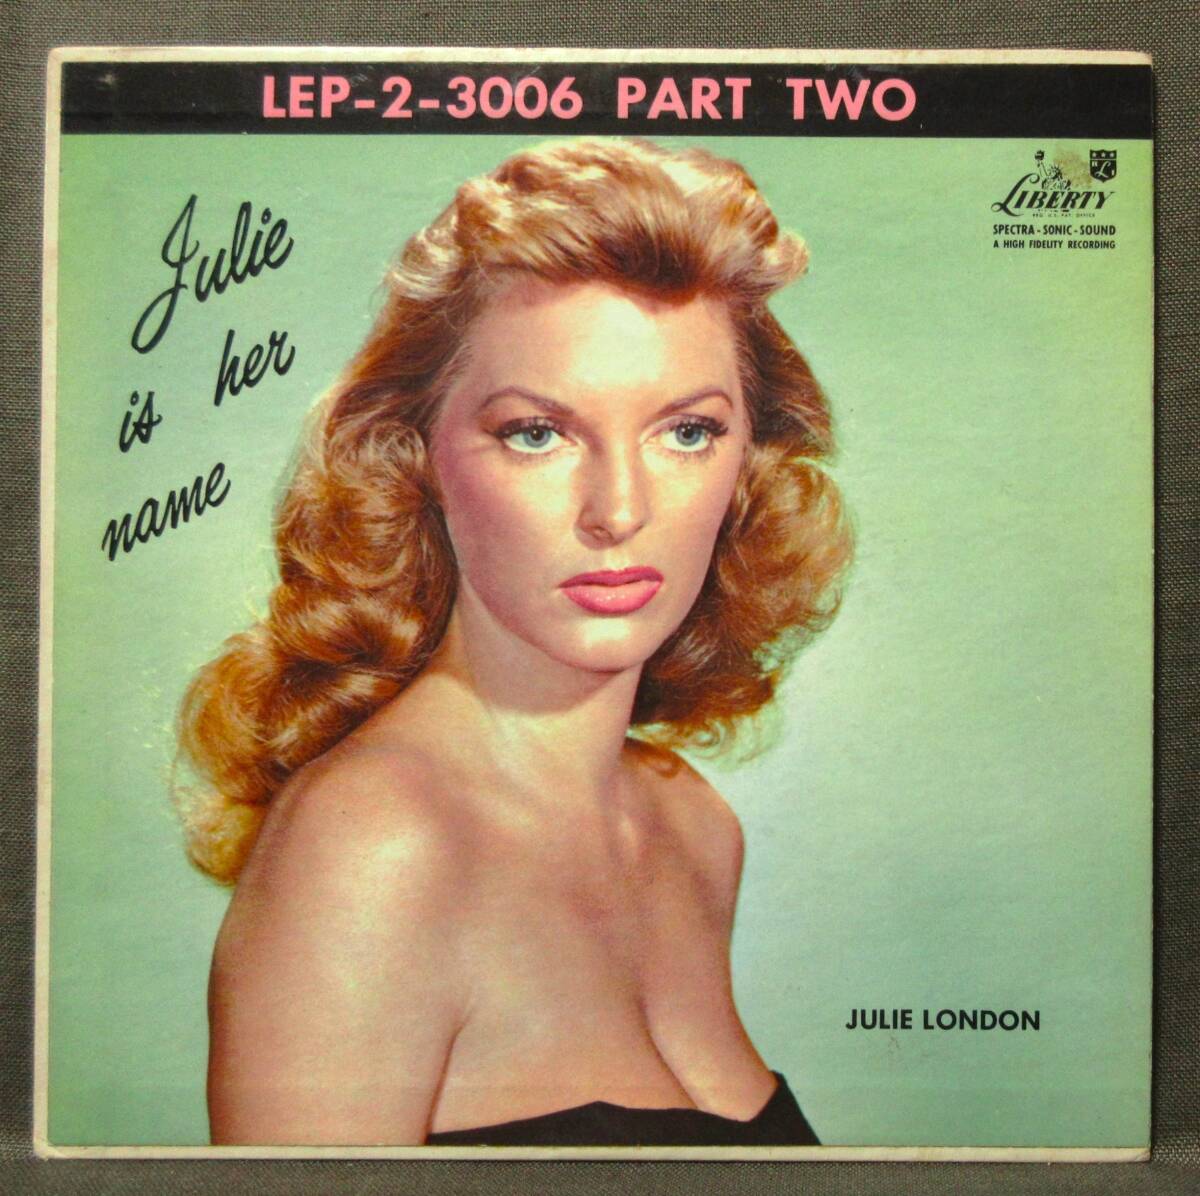 7\'\'EP レアシングル盤! 米/Liberty JULIE LONDON [Julie Is Her Name] 4曲入り/ジュリー・ロンドン/LEP-2-3006 PART TWO